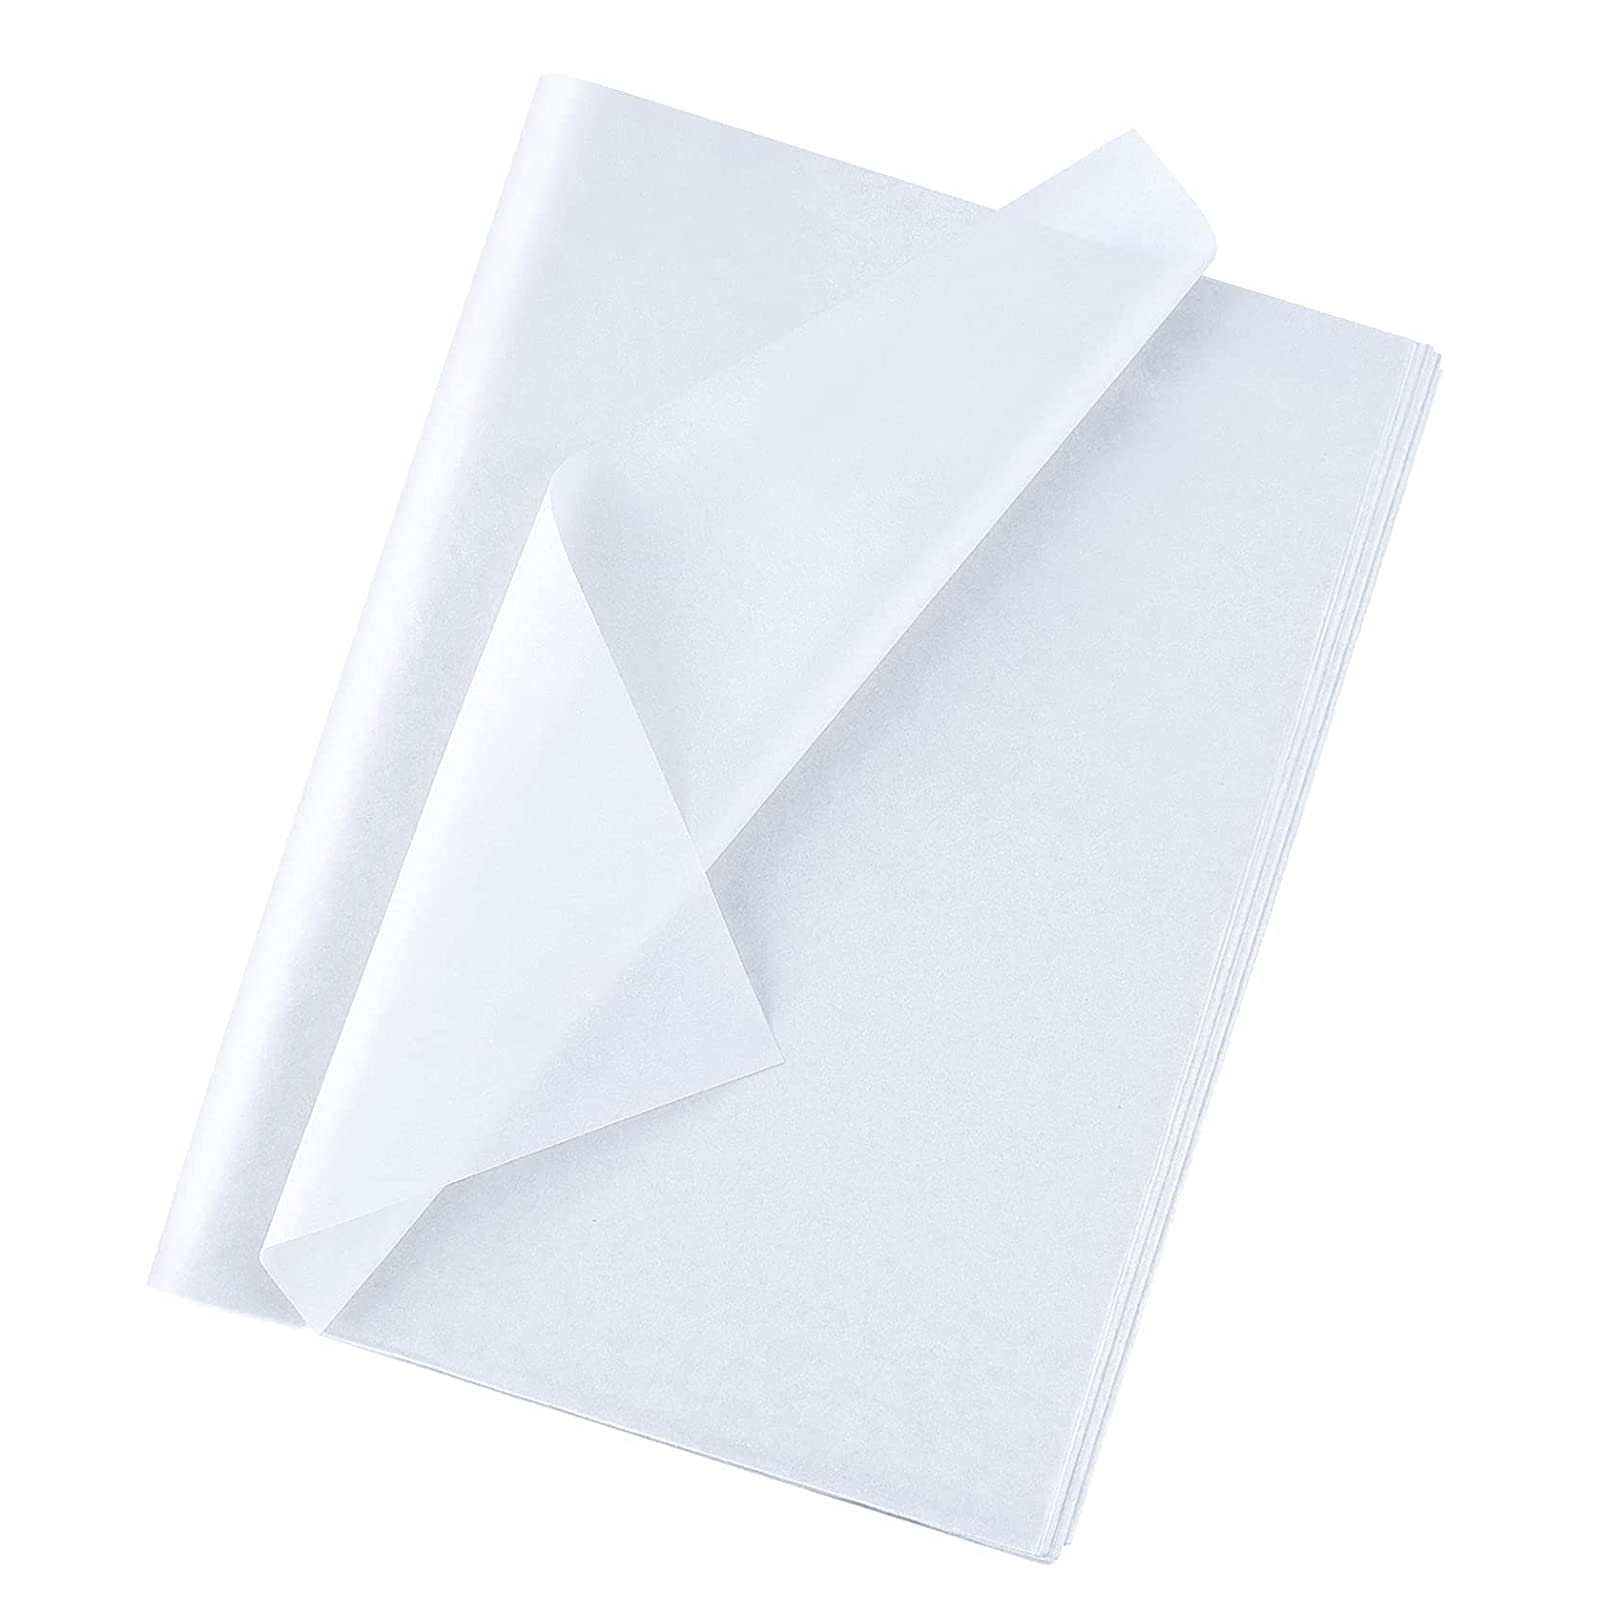 75pk White Tissue Paper Sheets for Packaging 66 x 50cm, White Tissue Paper  for Wrapping Gifts, Tissue Paper for Packaging